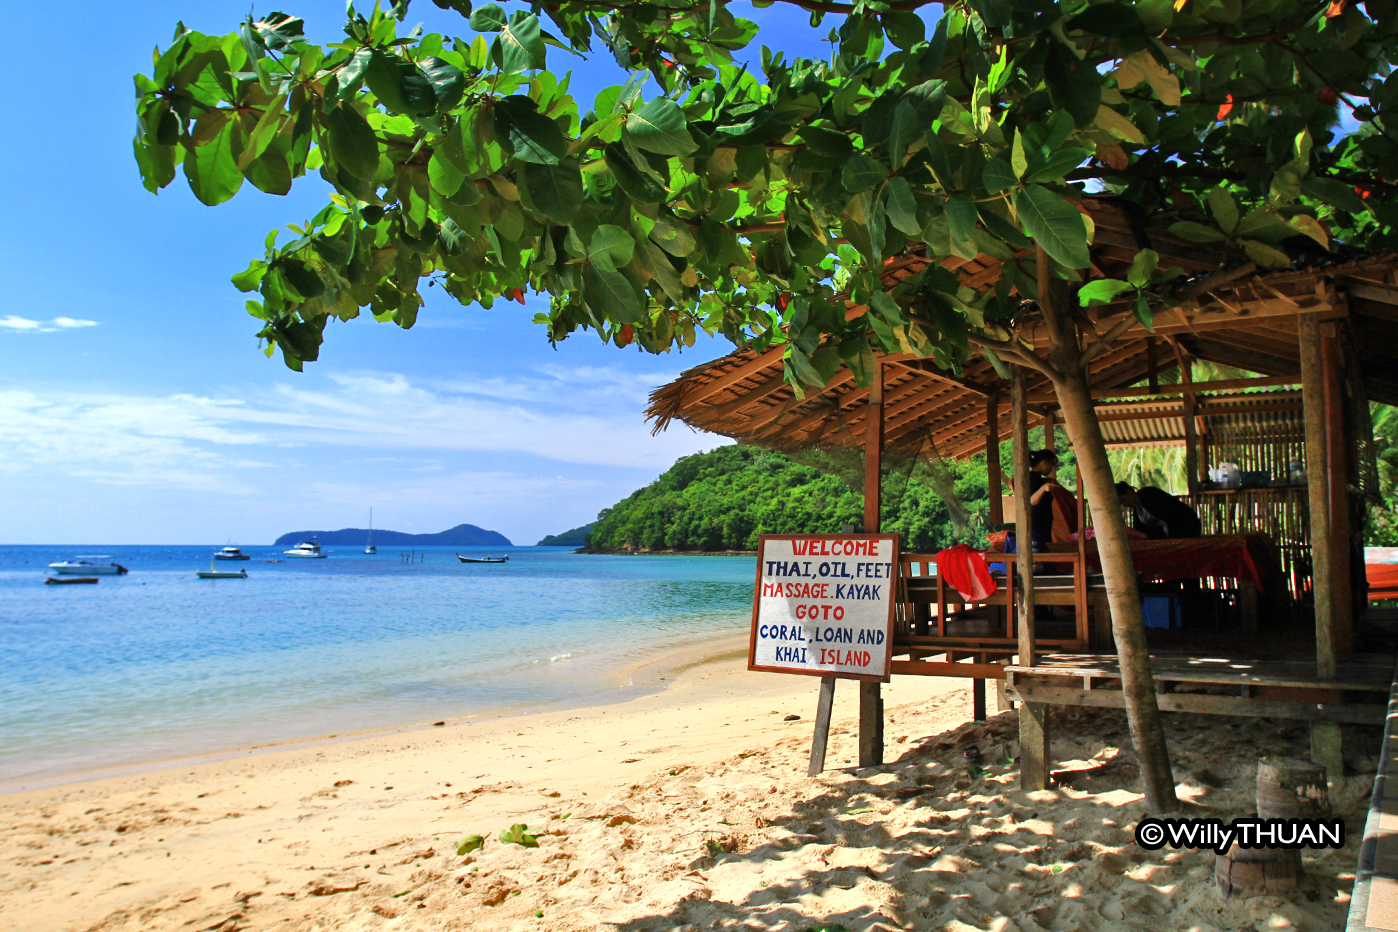 Here Are Some Useful Tips To Have The Best Holiday Trip At Phuket